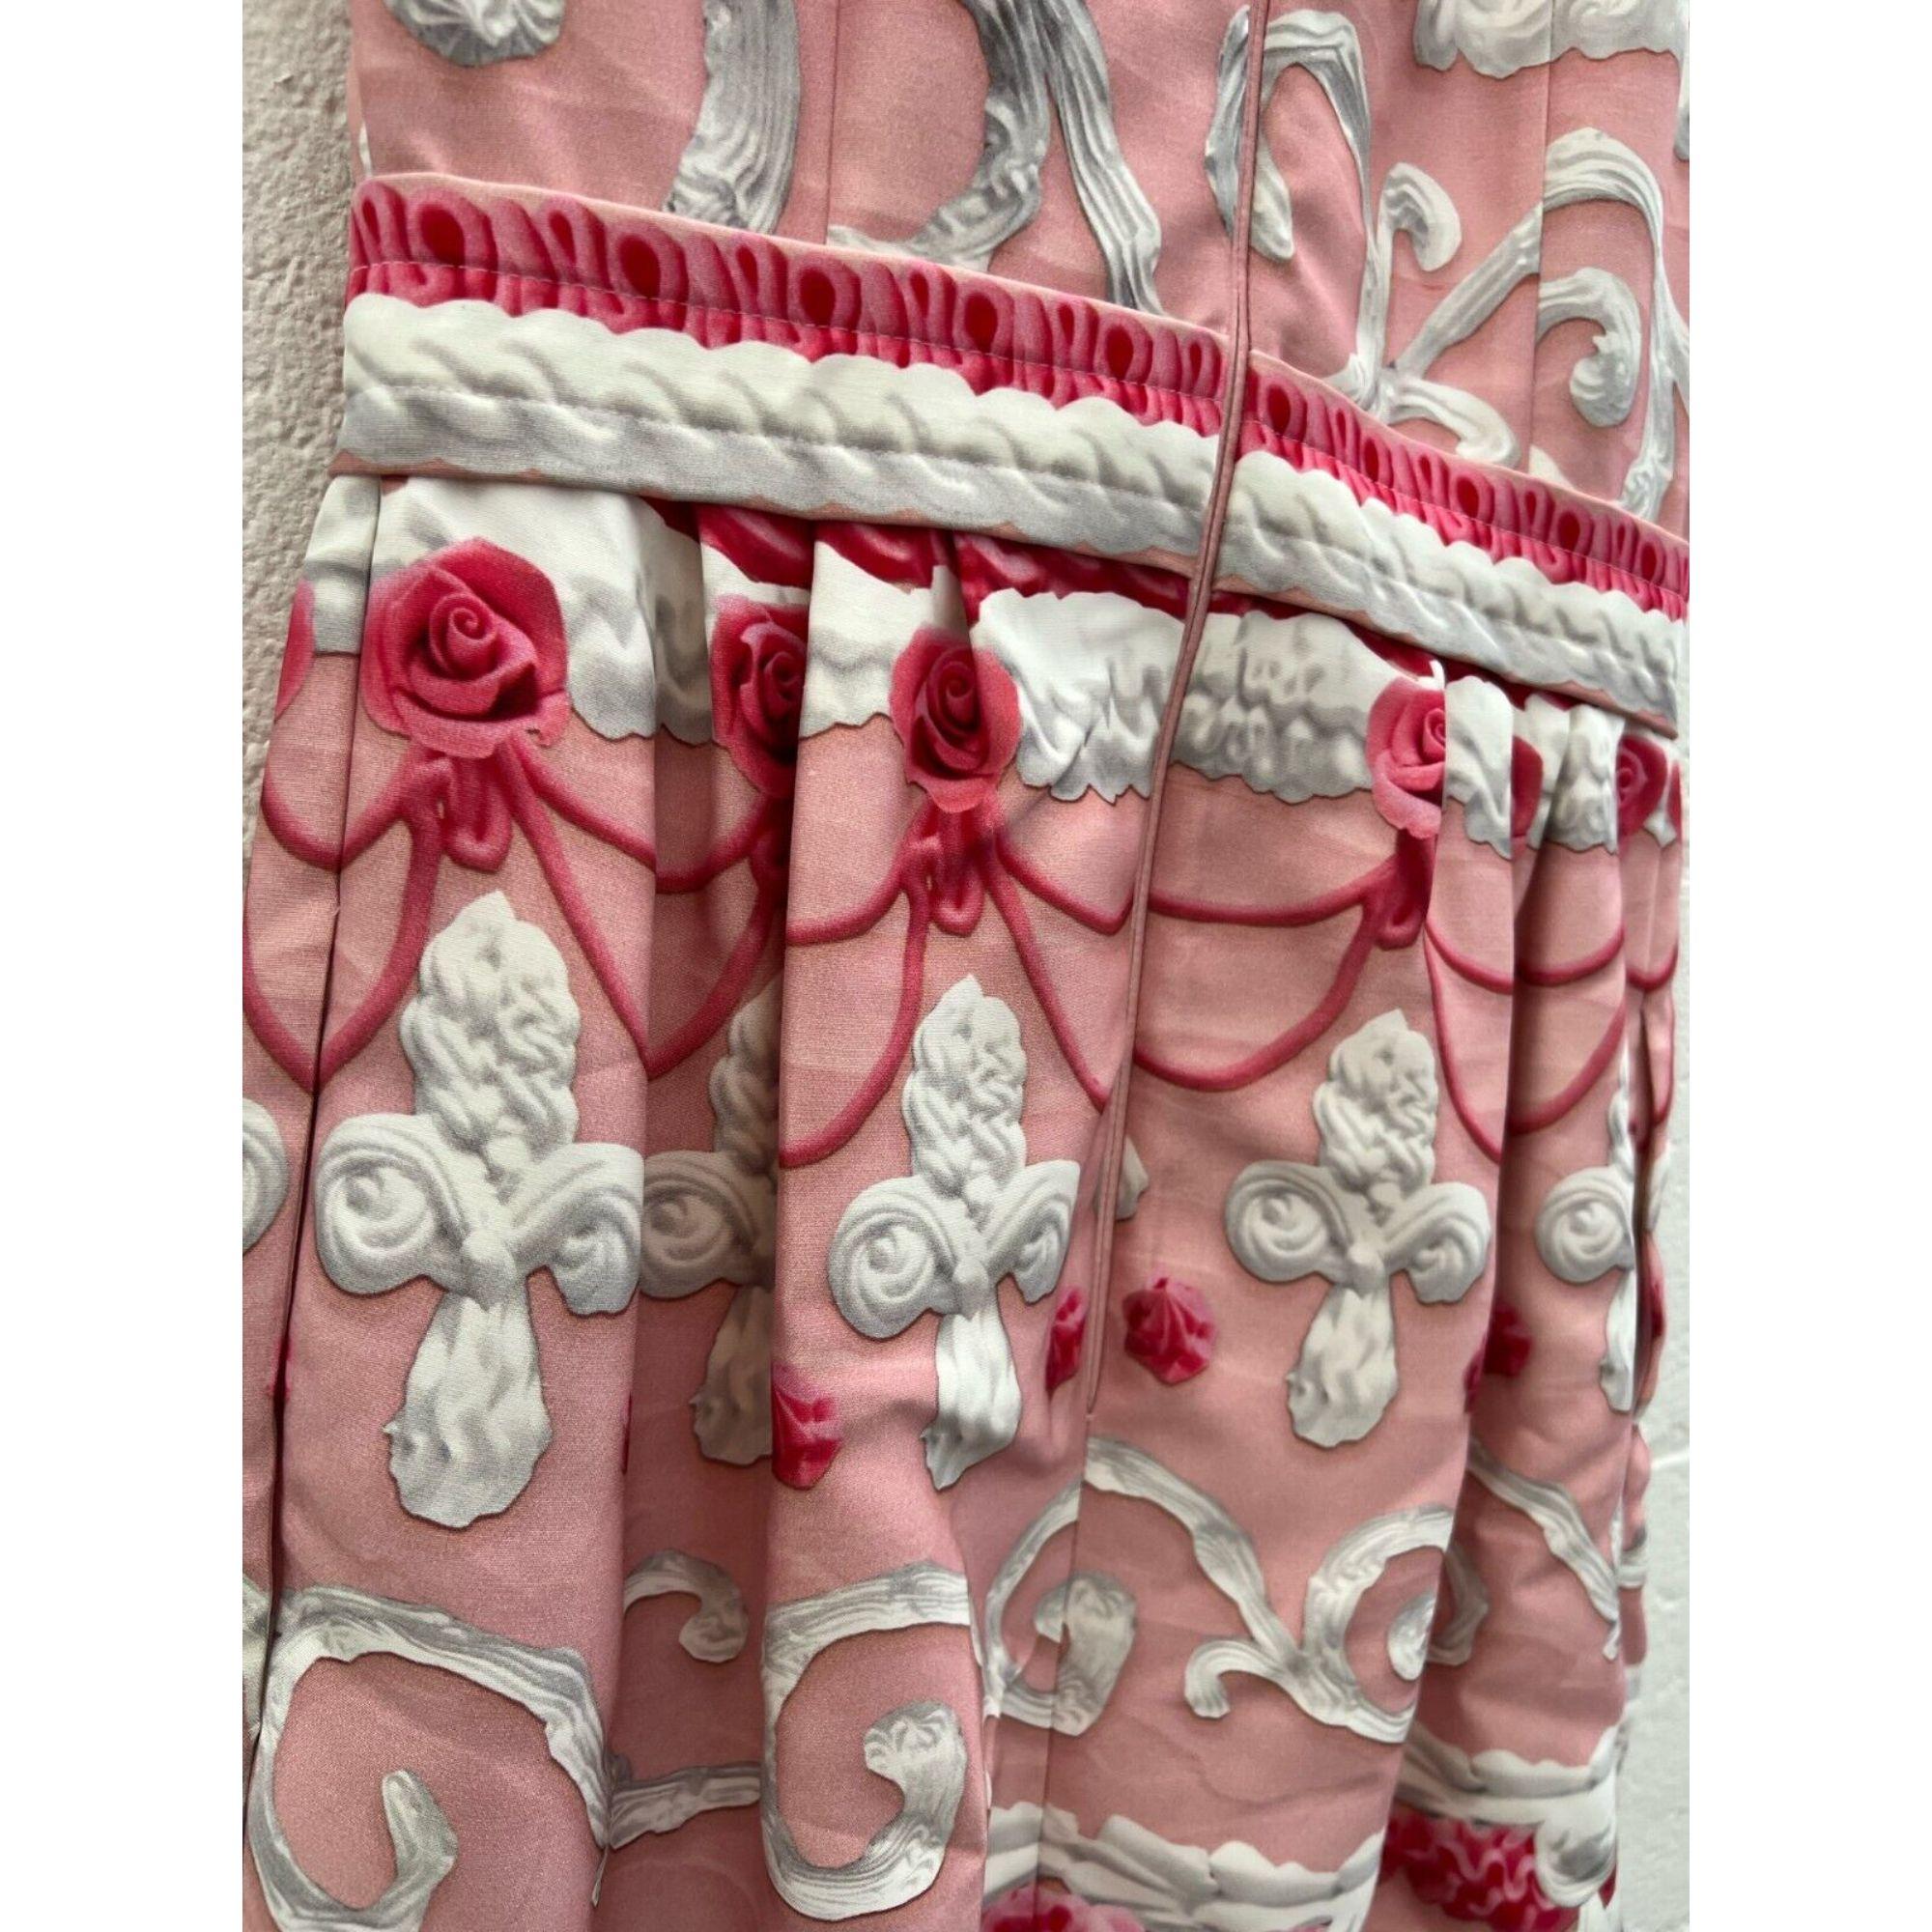 AW20 Moschino Couture Marie Antoinette Pink Pastel Cake Dress by Jeremy Scott en vente 4